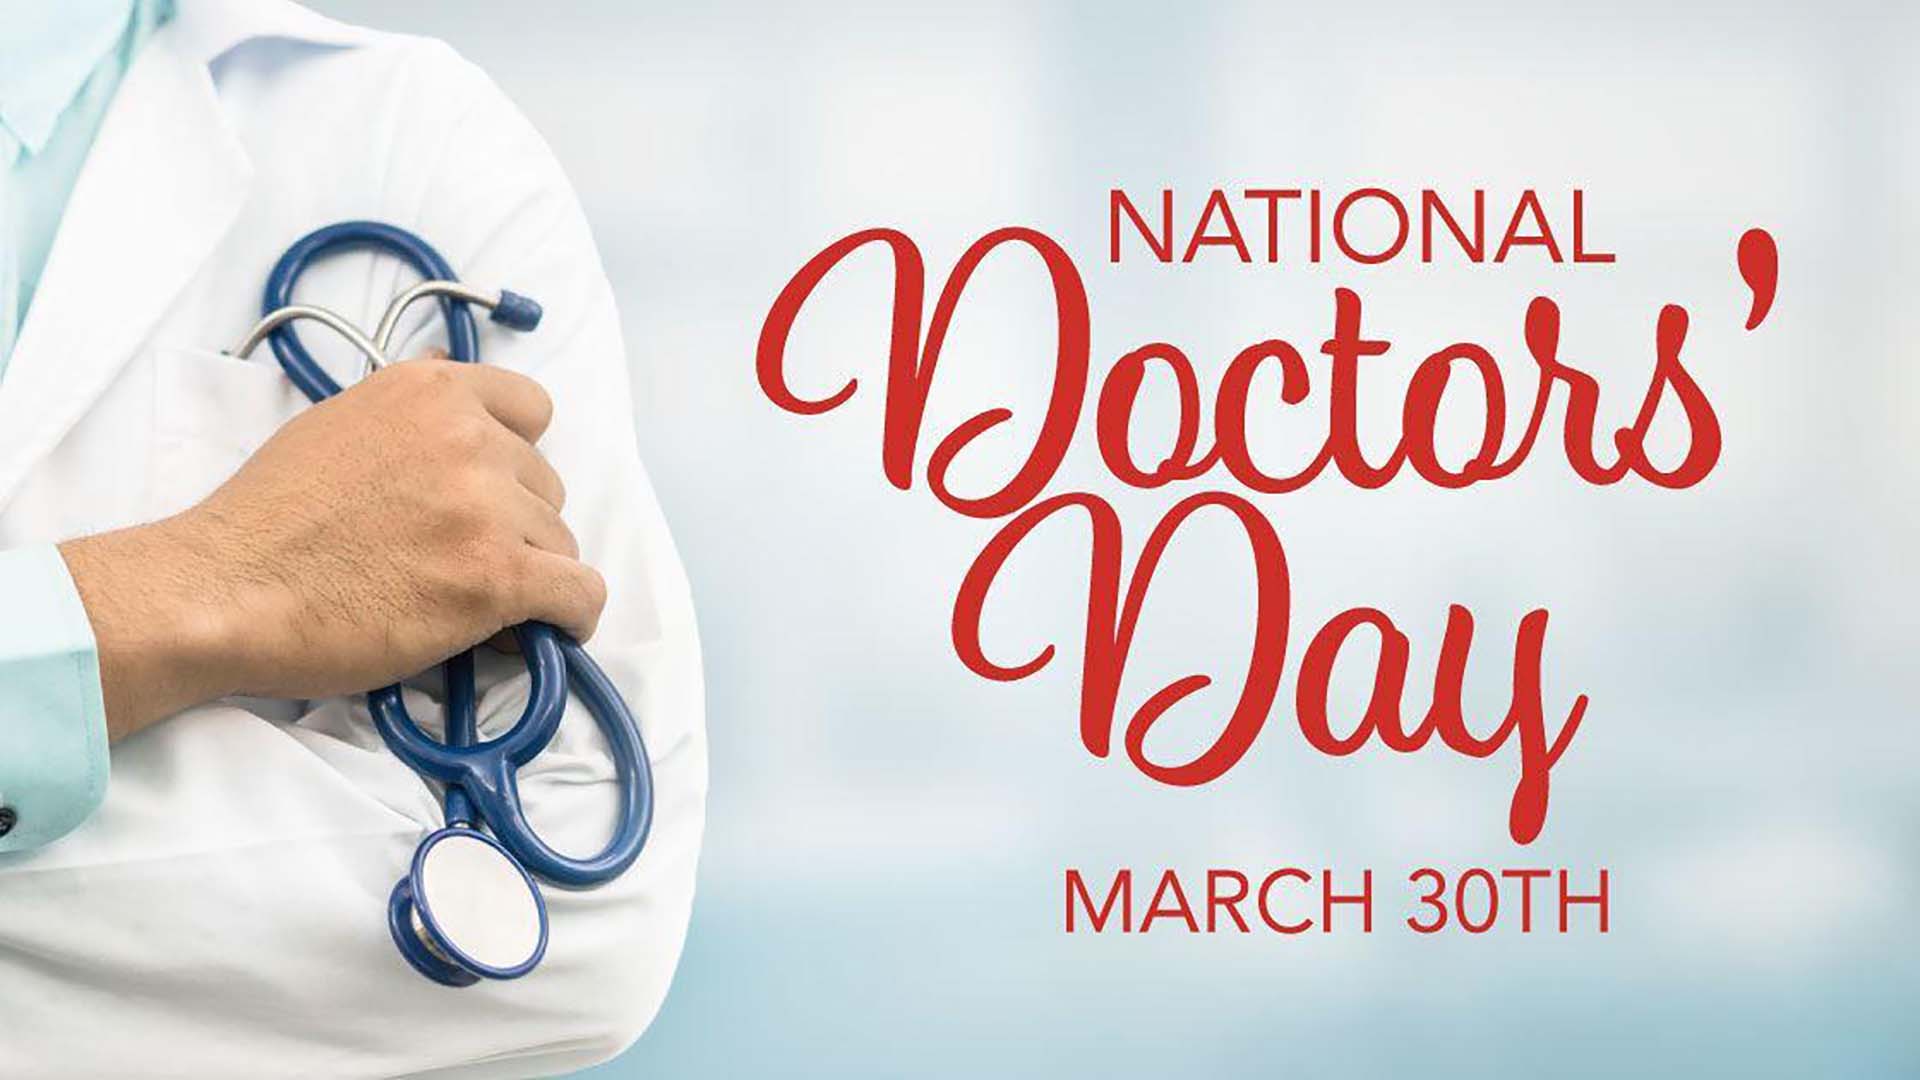 Doctor cut off toward the left side of the graphic with a stethoscope in their hand. Their arms are crossed. National Doctors Day March 30th spelled out on the right side of the graphic with a blurred background.